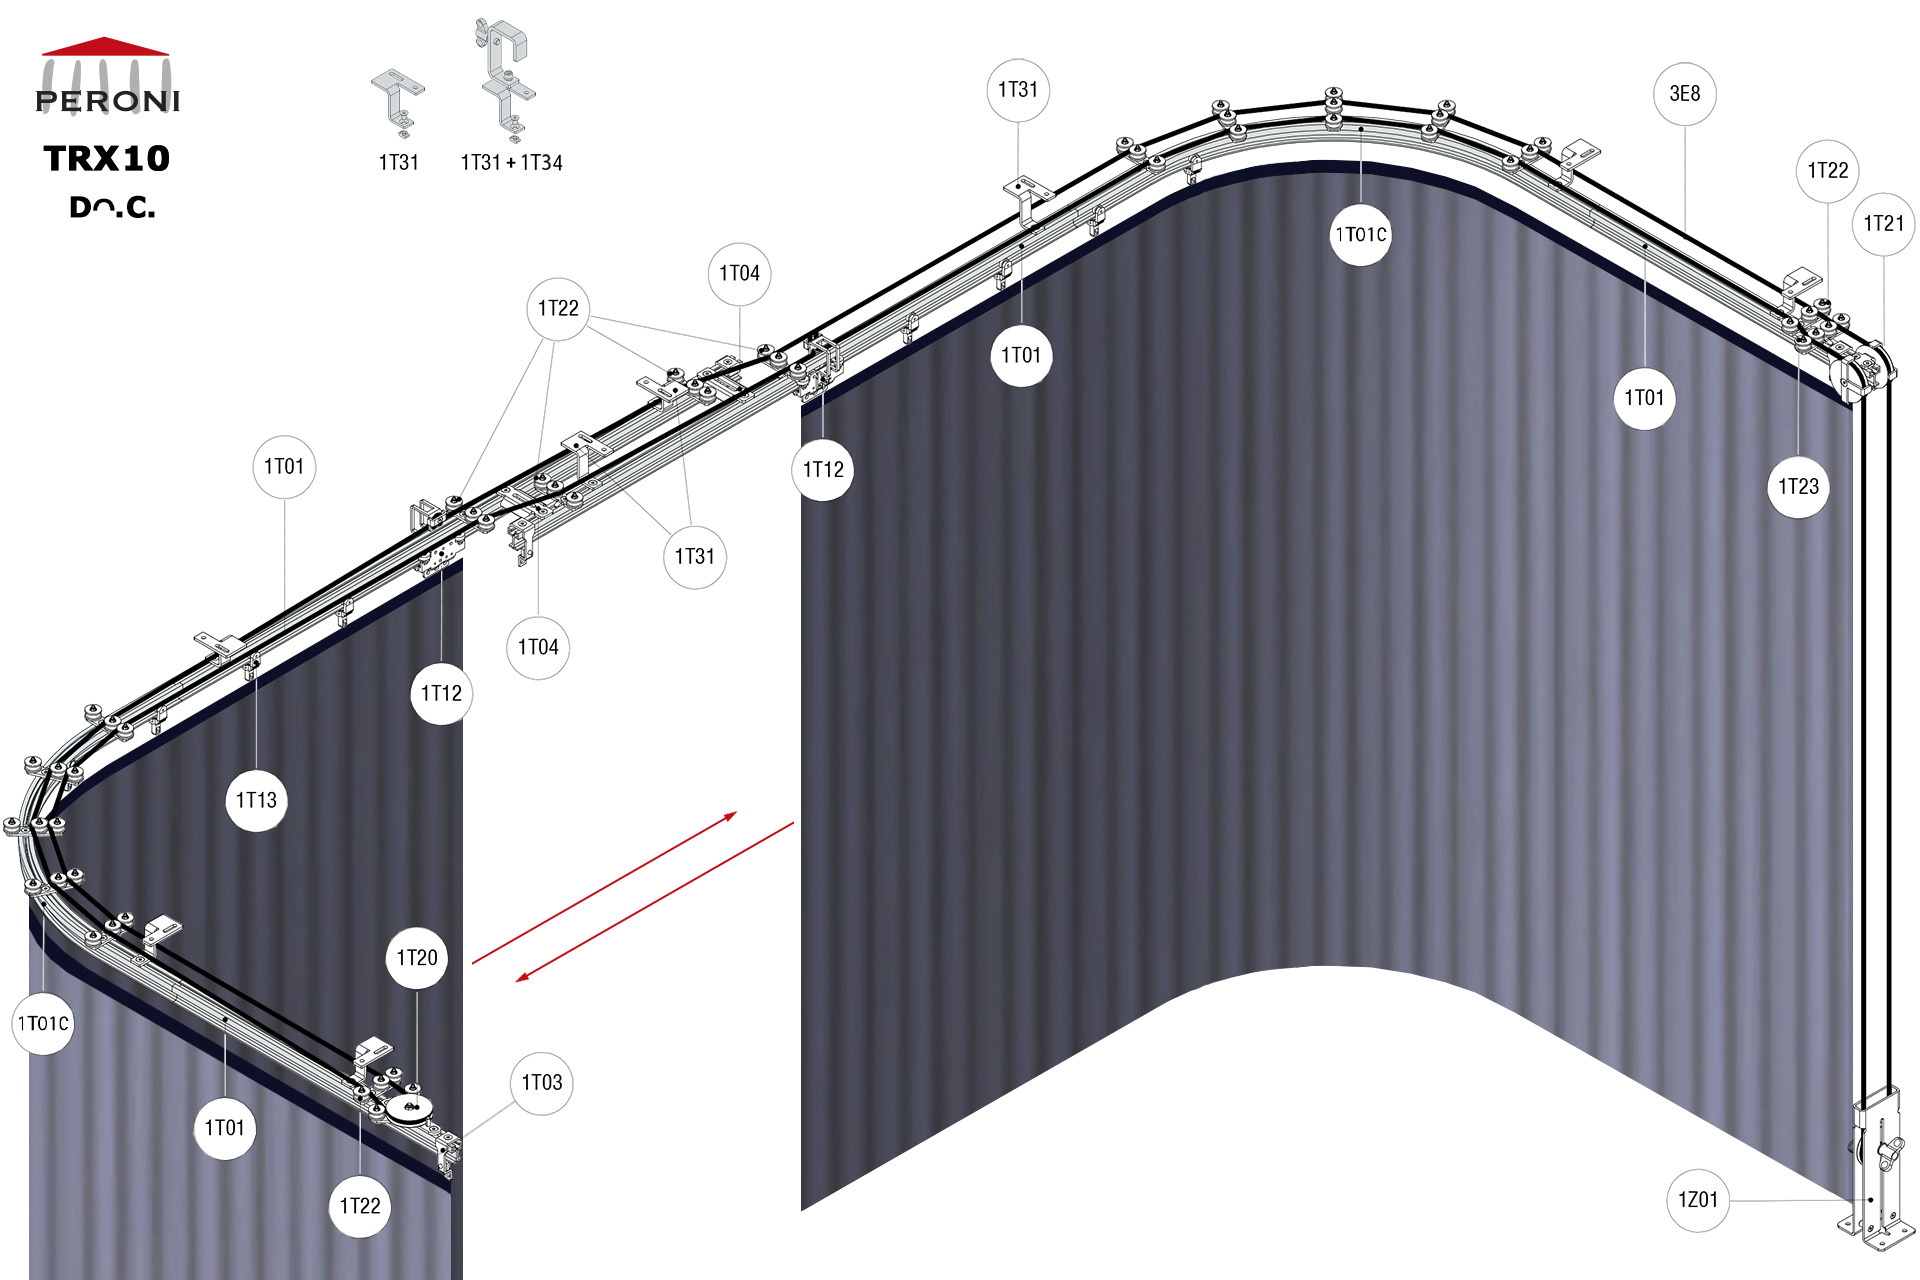 Dᴖ.C. configuration track Dᴖ. Curved double rail central openingC. Corded manualcentral overlap exceeding 50 cmComponents1T01 - Straight rail1T01C - Curved rail1T02 - Connection set1T03 - End stop1T04 - Spacer plate1T12 - Top cord master carrier1T13 - 2 wheel runnerMotion control1T20 - Return pulley1T21 - Head double pulley1T22 - Top cord guide1T23 - Top cord aligner1Z01 - Adjustable floor pulley3E - Poly rope Ø 8 mmFixing1T31 - Central cord suspension bracket1T34 - Hook clamp - Bracket fixing